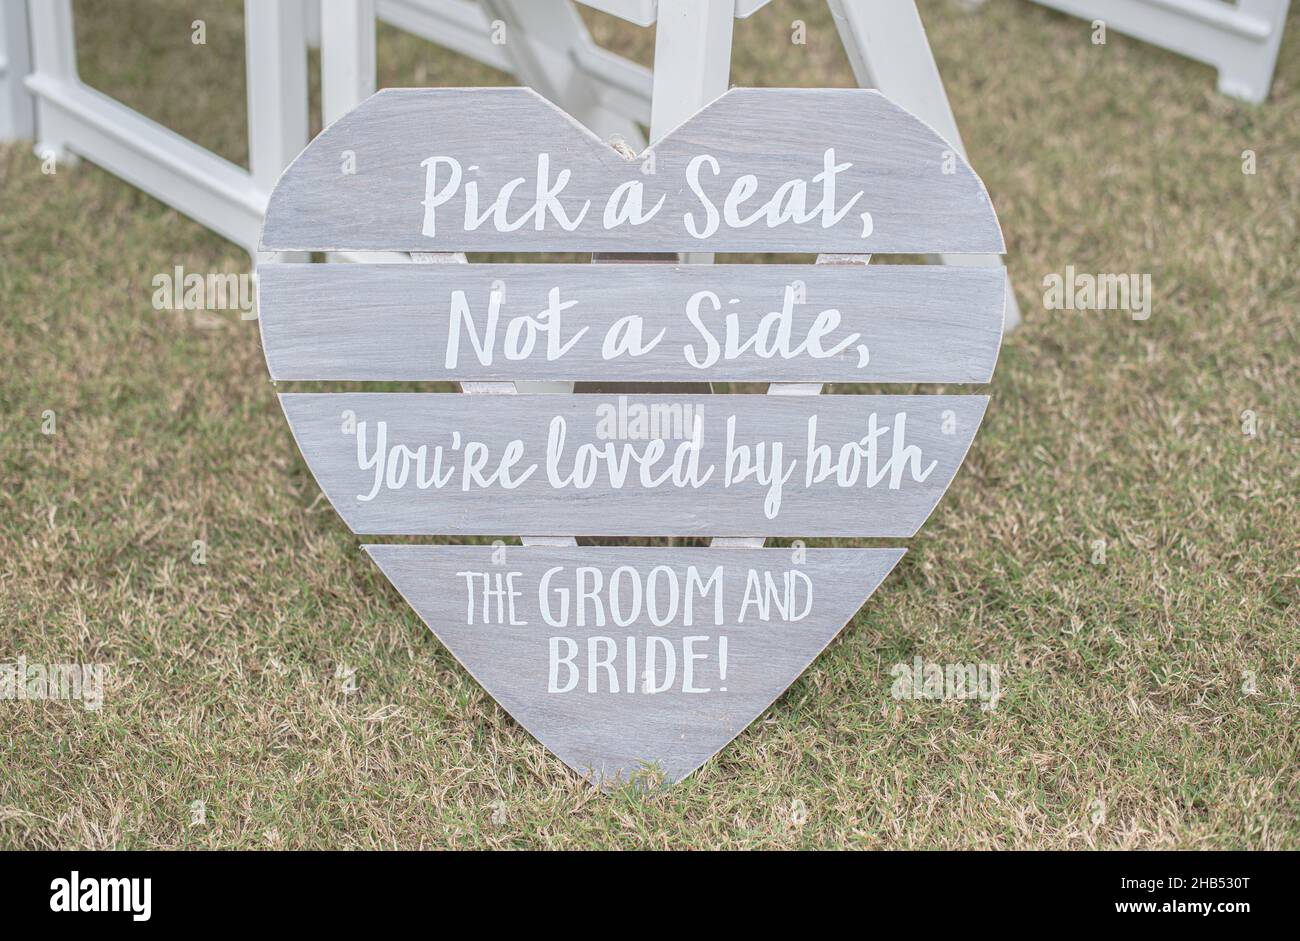 Pick a seat not a side wedding ceremony sign made of wood in the shape of a  heart Stock Photo - Alamy